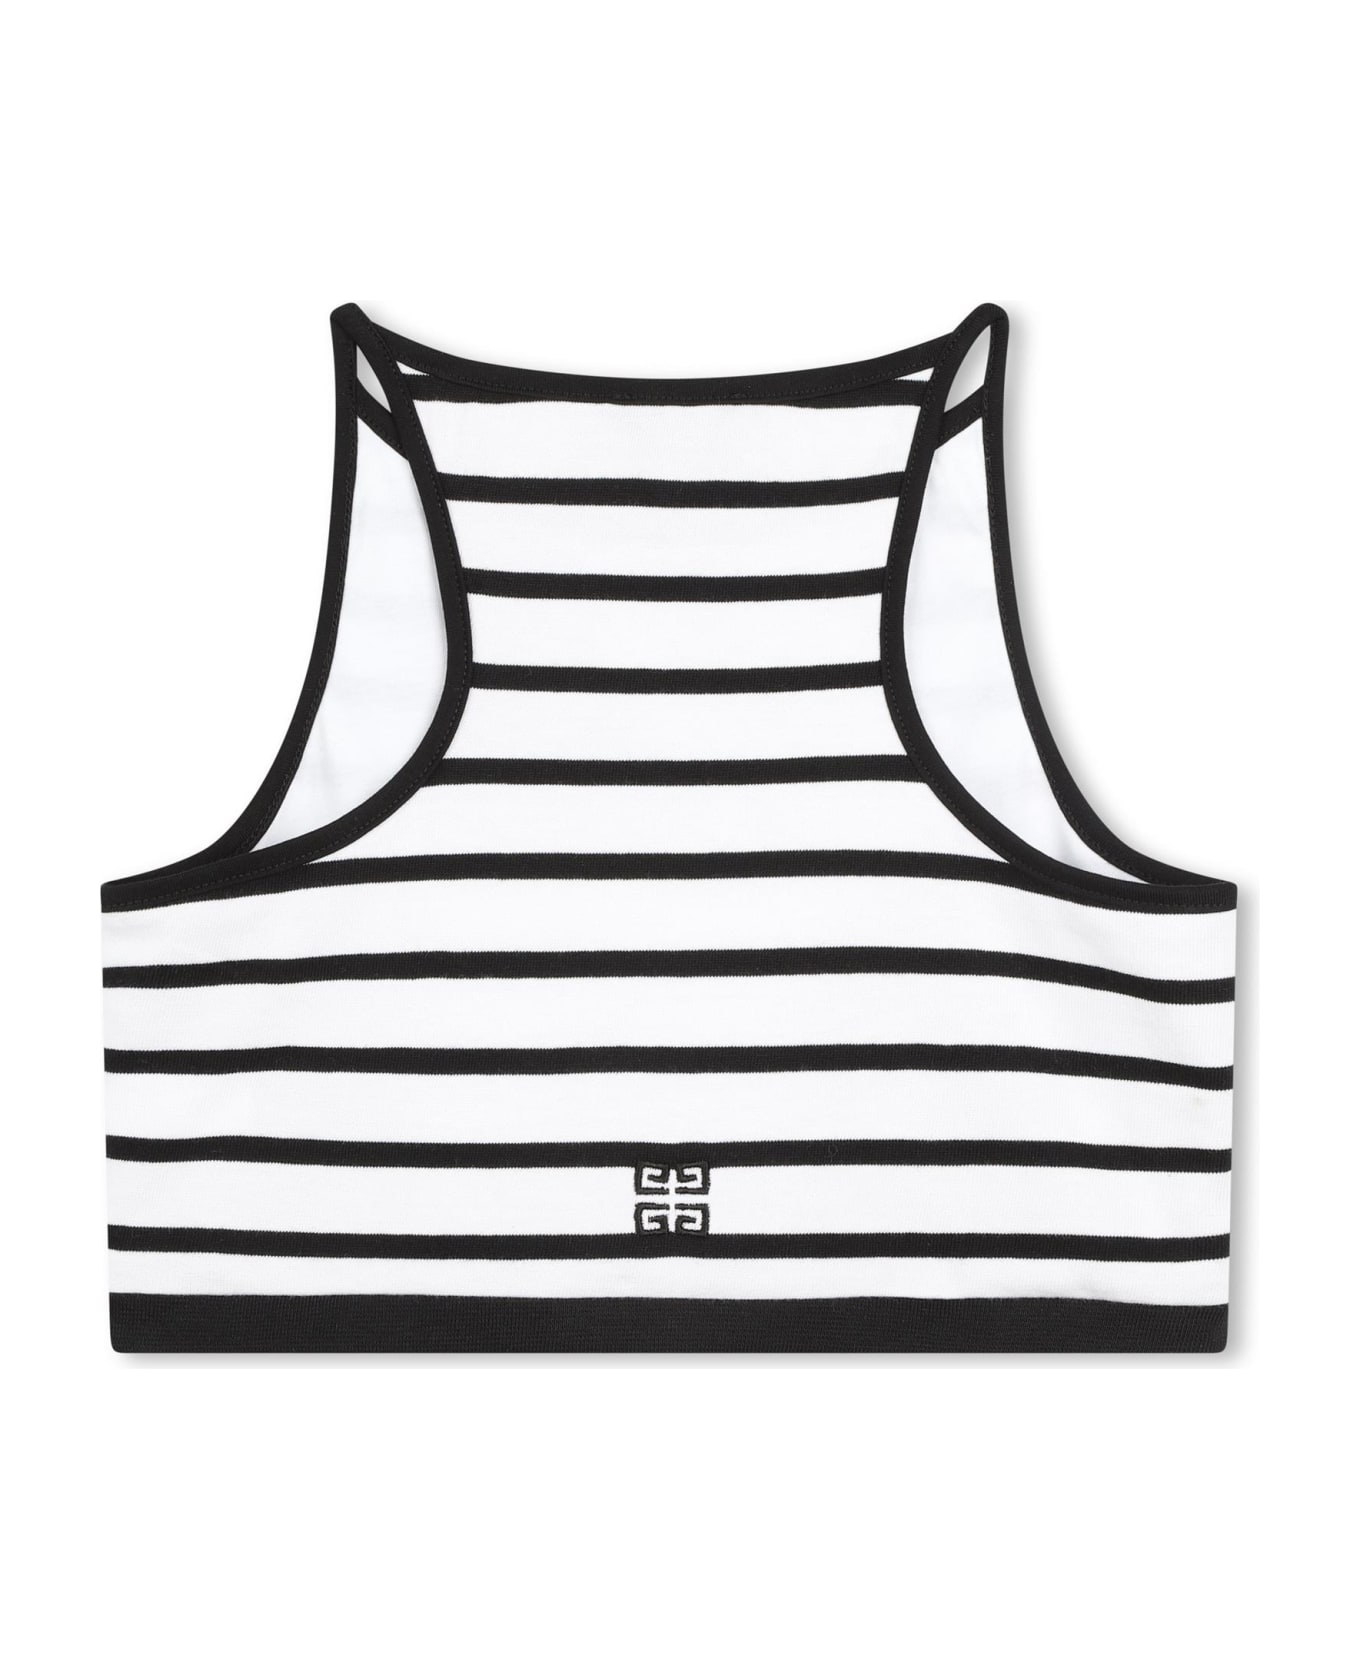 Givenchy Crop Top With Striped Embroidery - Nero